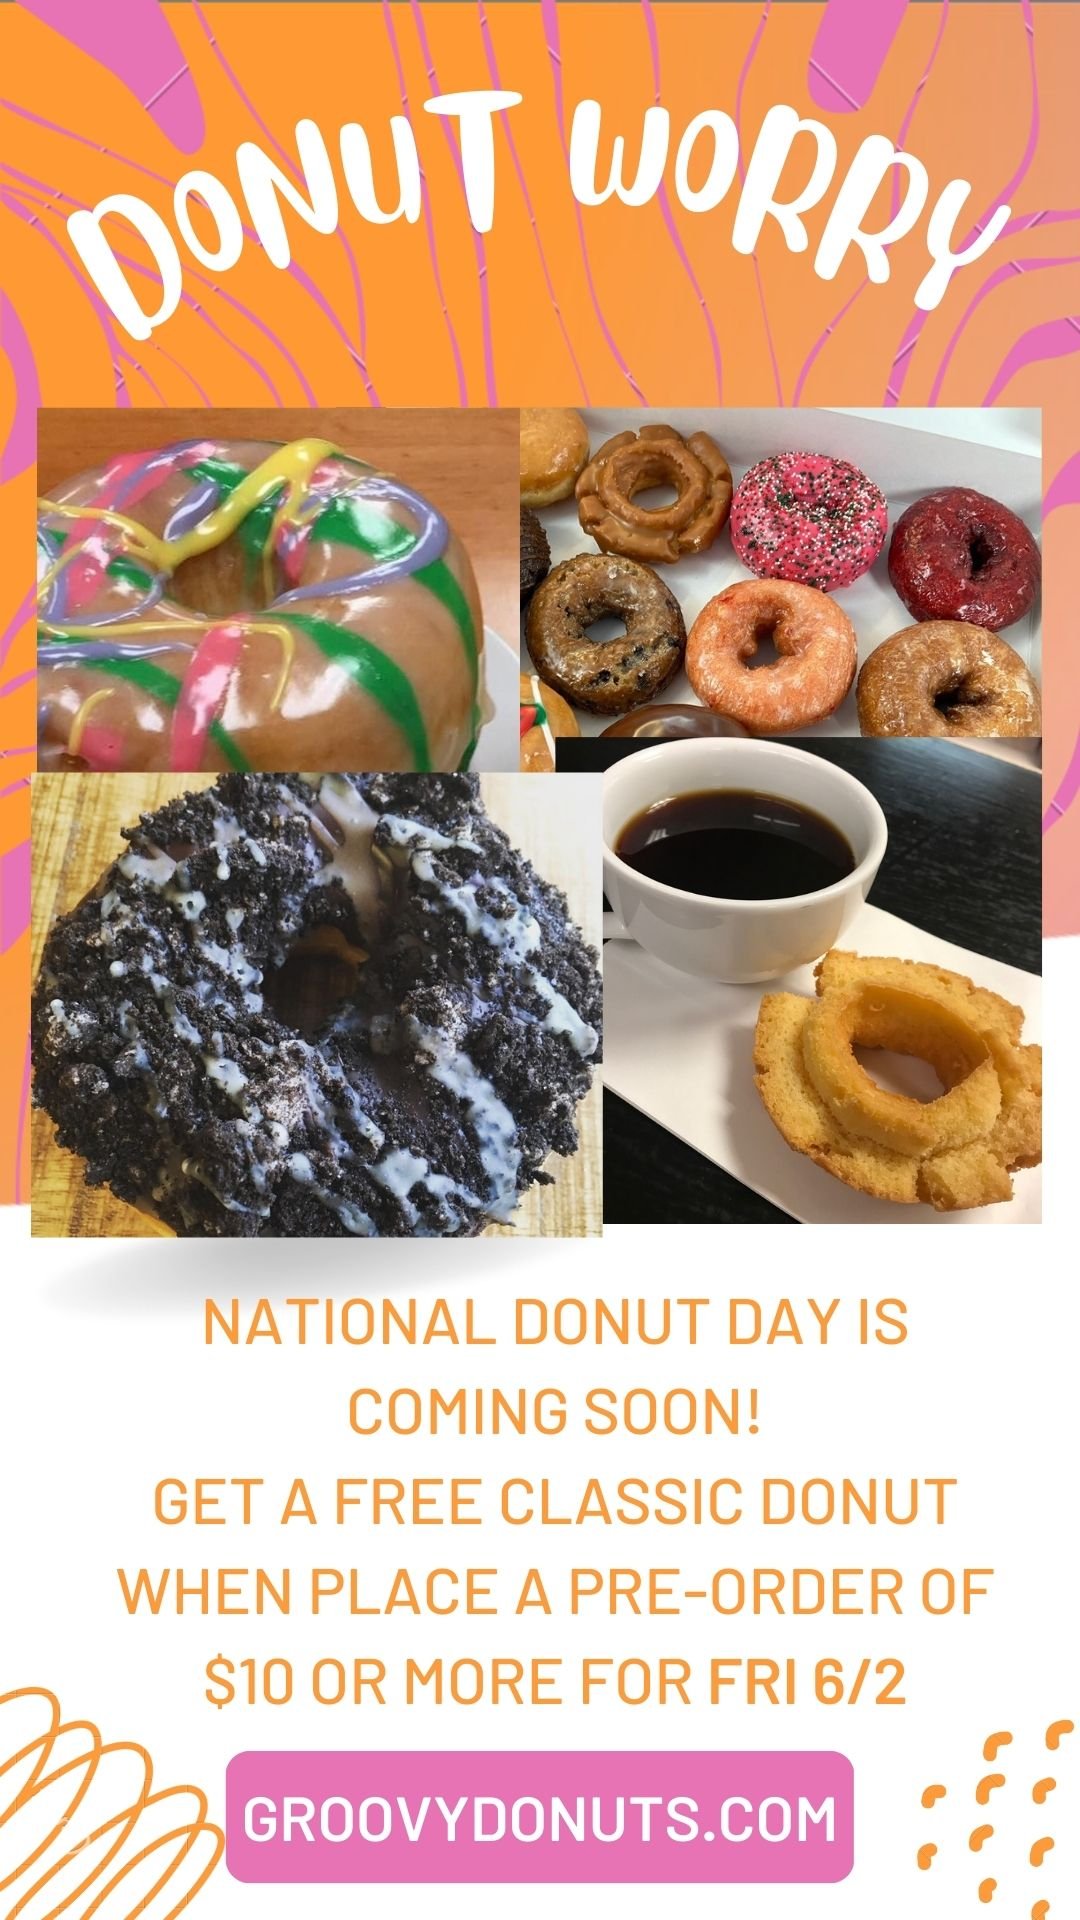 Want a Free Donut on National Donut Day? — Groovy Donuts